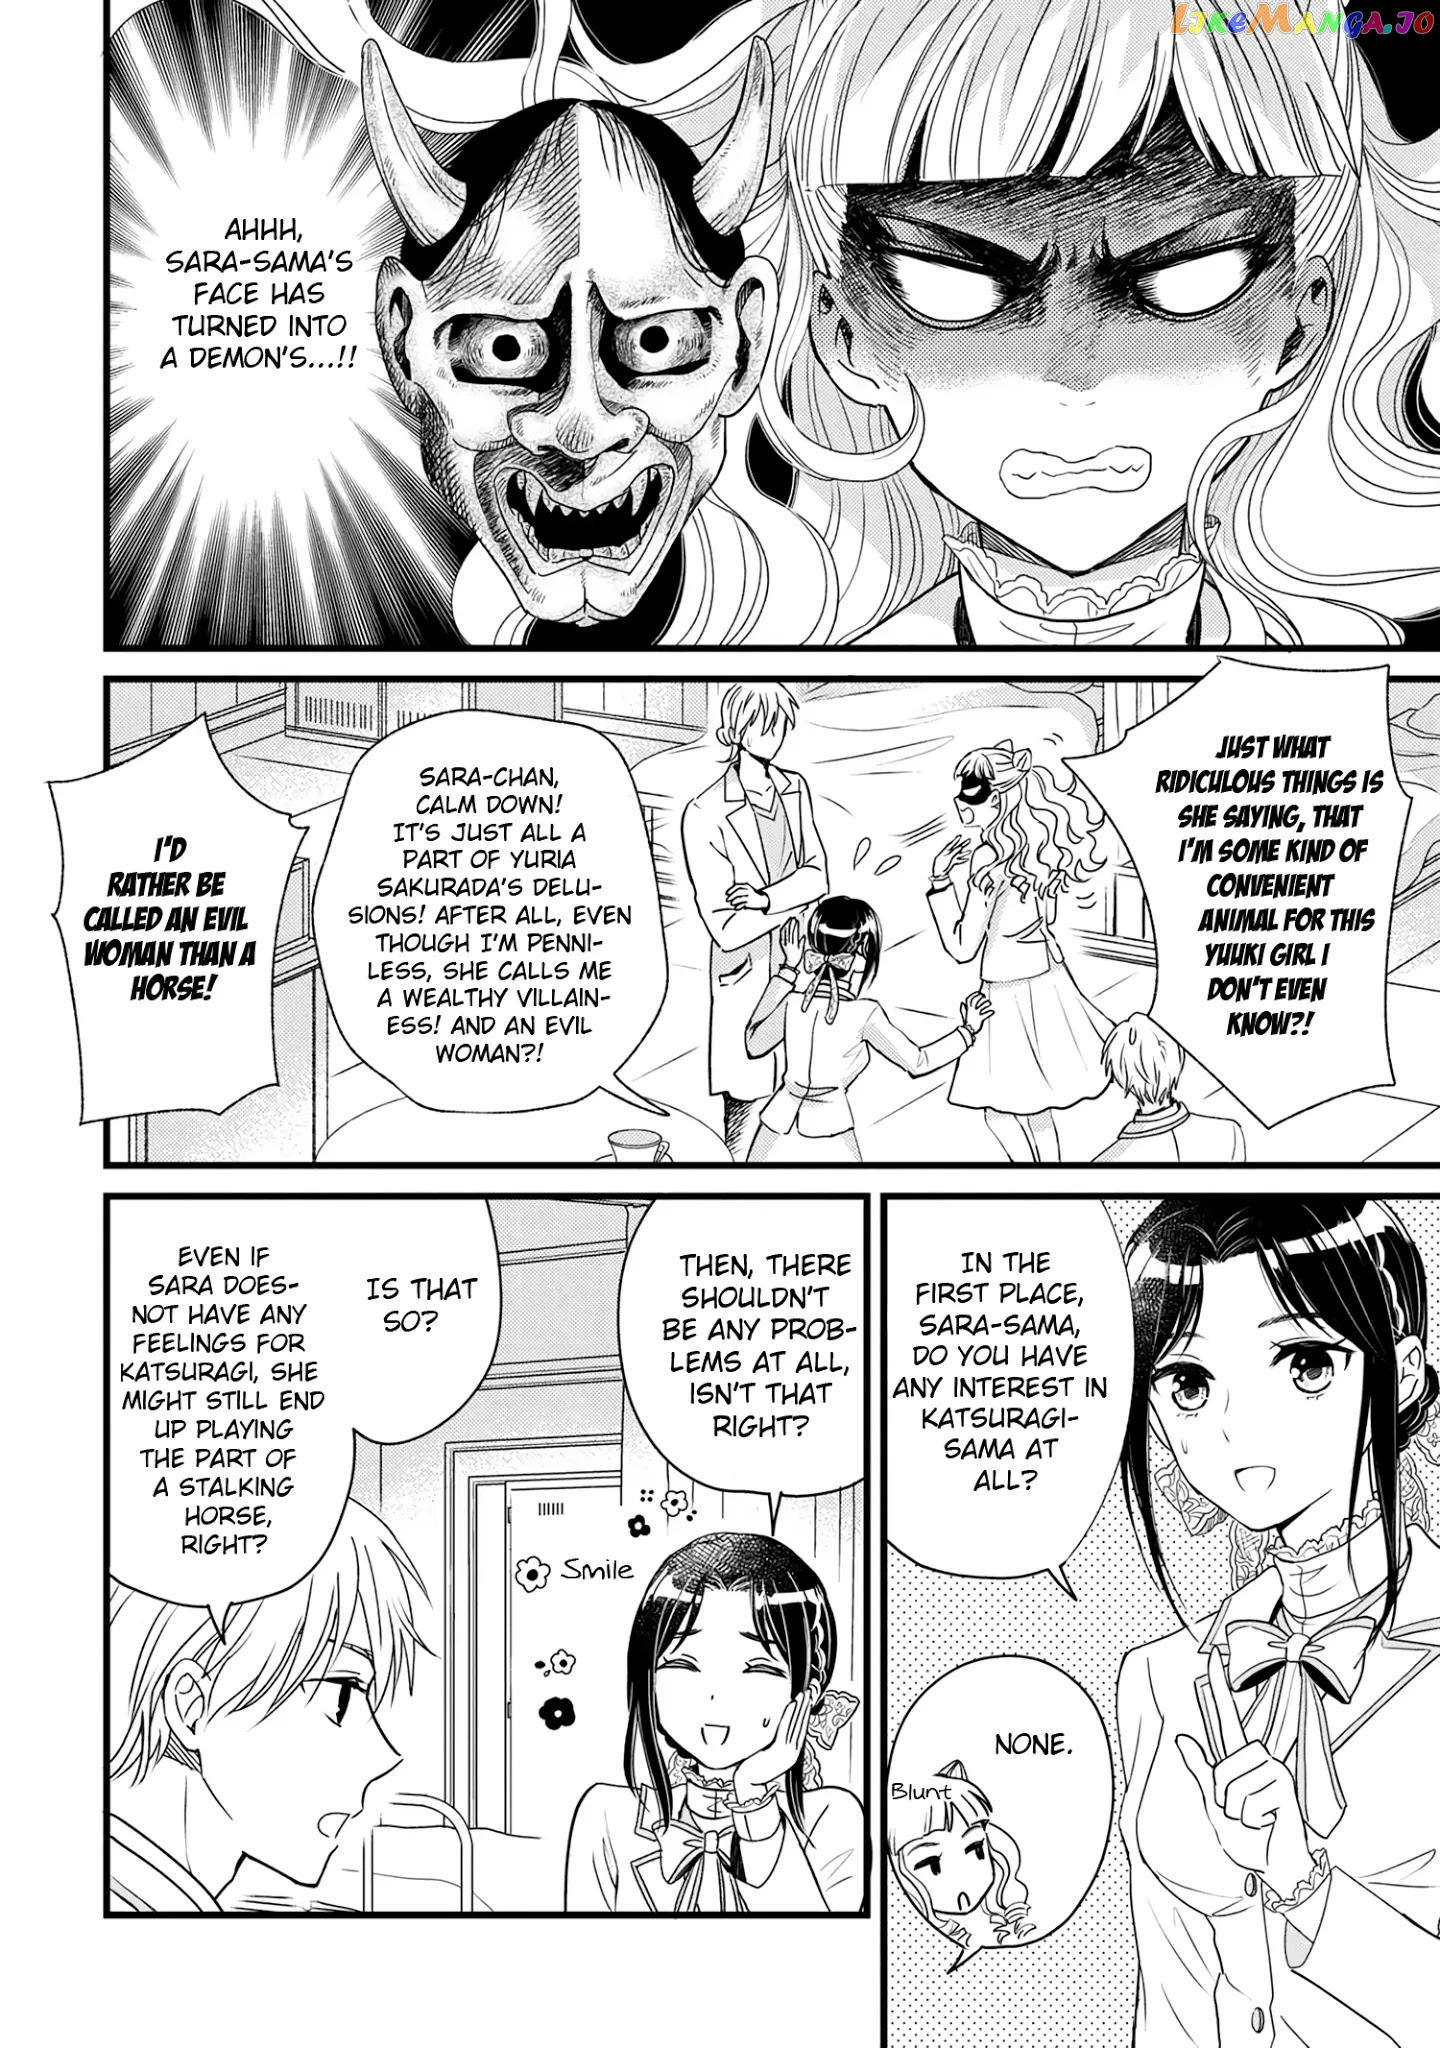 Reiko's Style: Despite Being Mistaken For A Rich Villainess, She's Actually Just Penniless chapter 3.3 - page 5